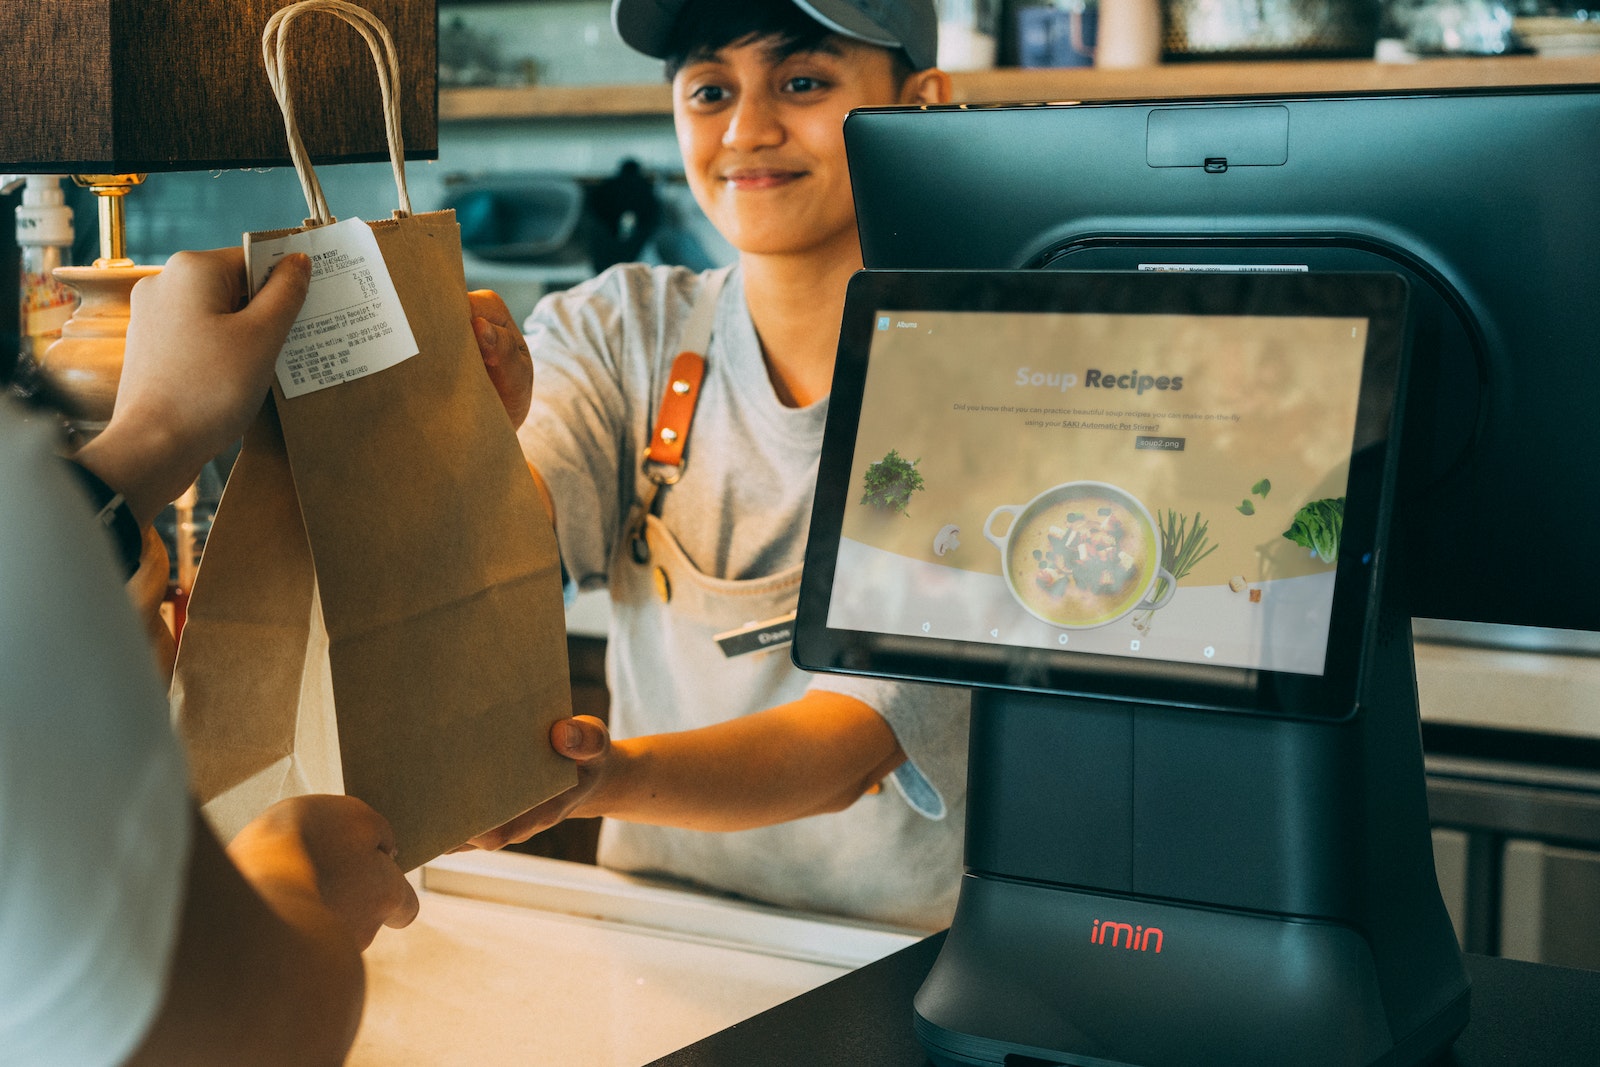 Smiling Employee Giving a Paper Bag with Receipt to a Customer